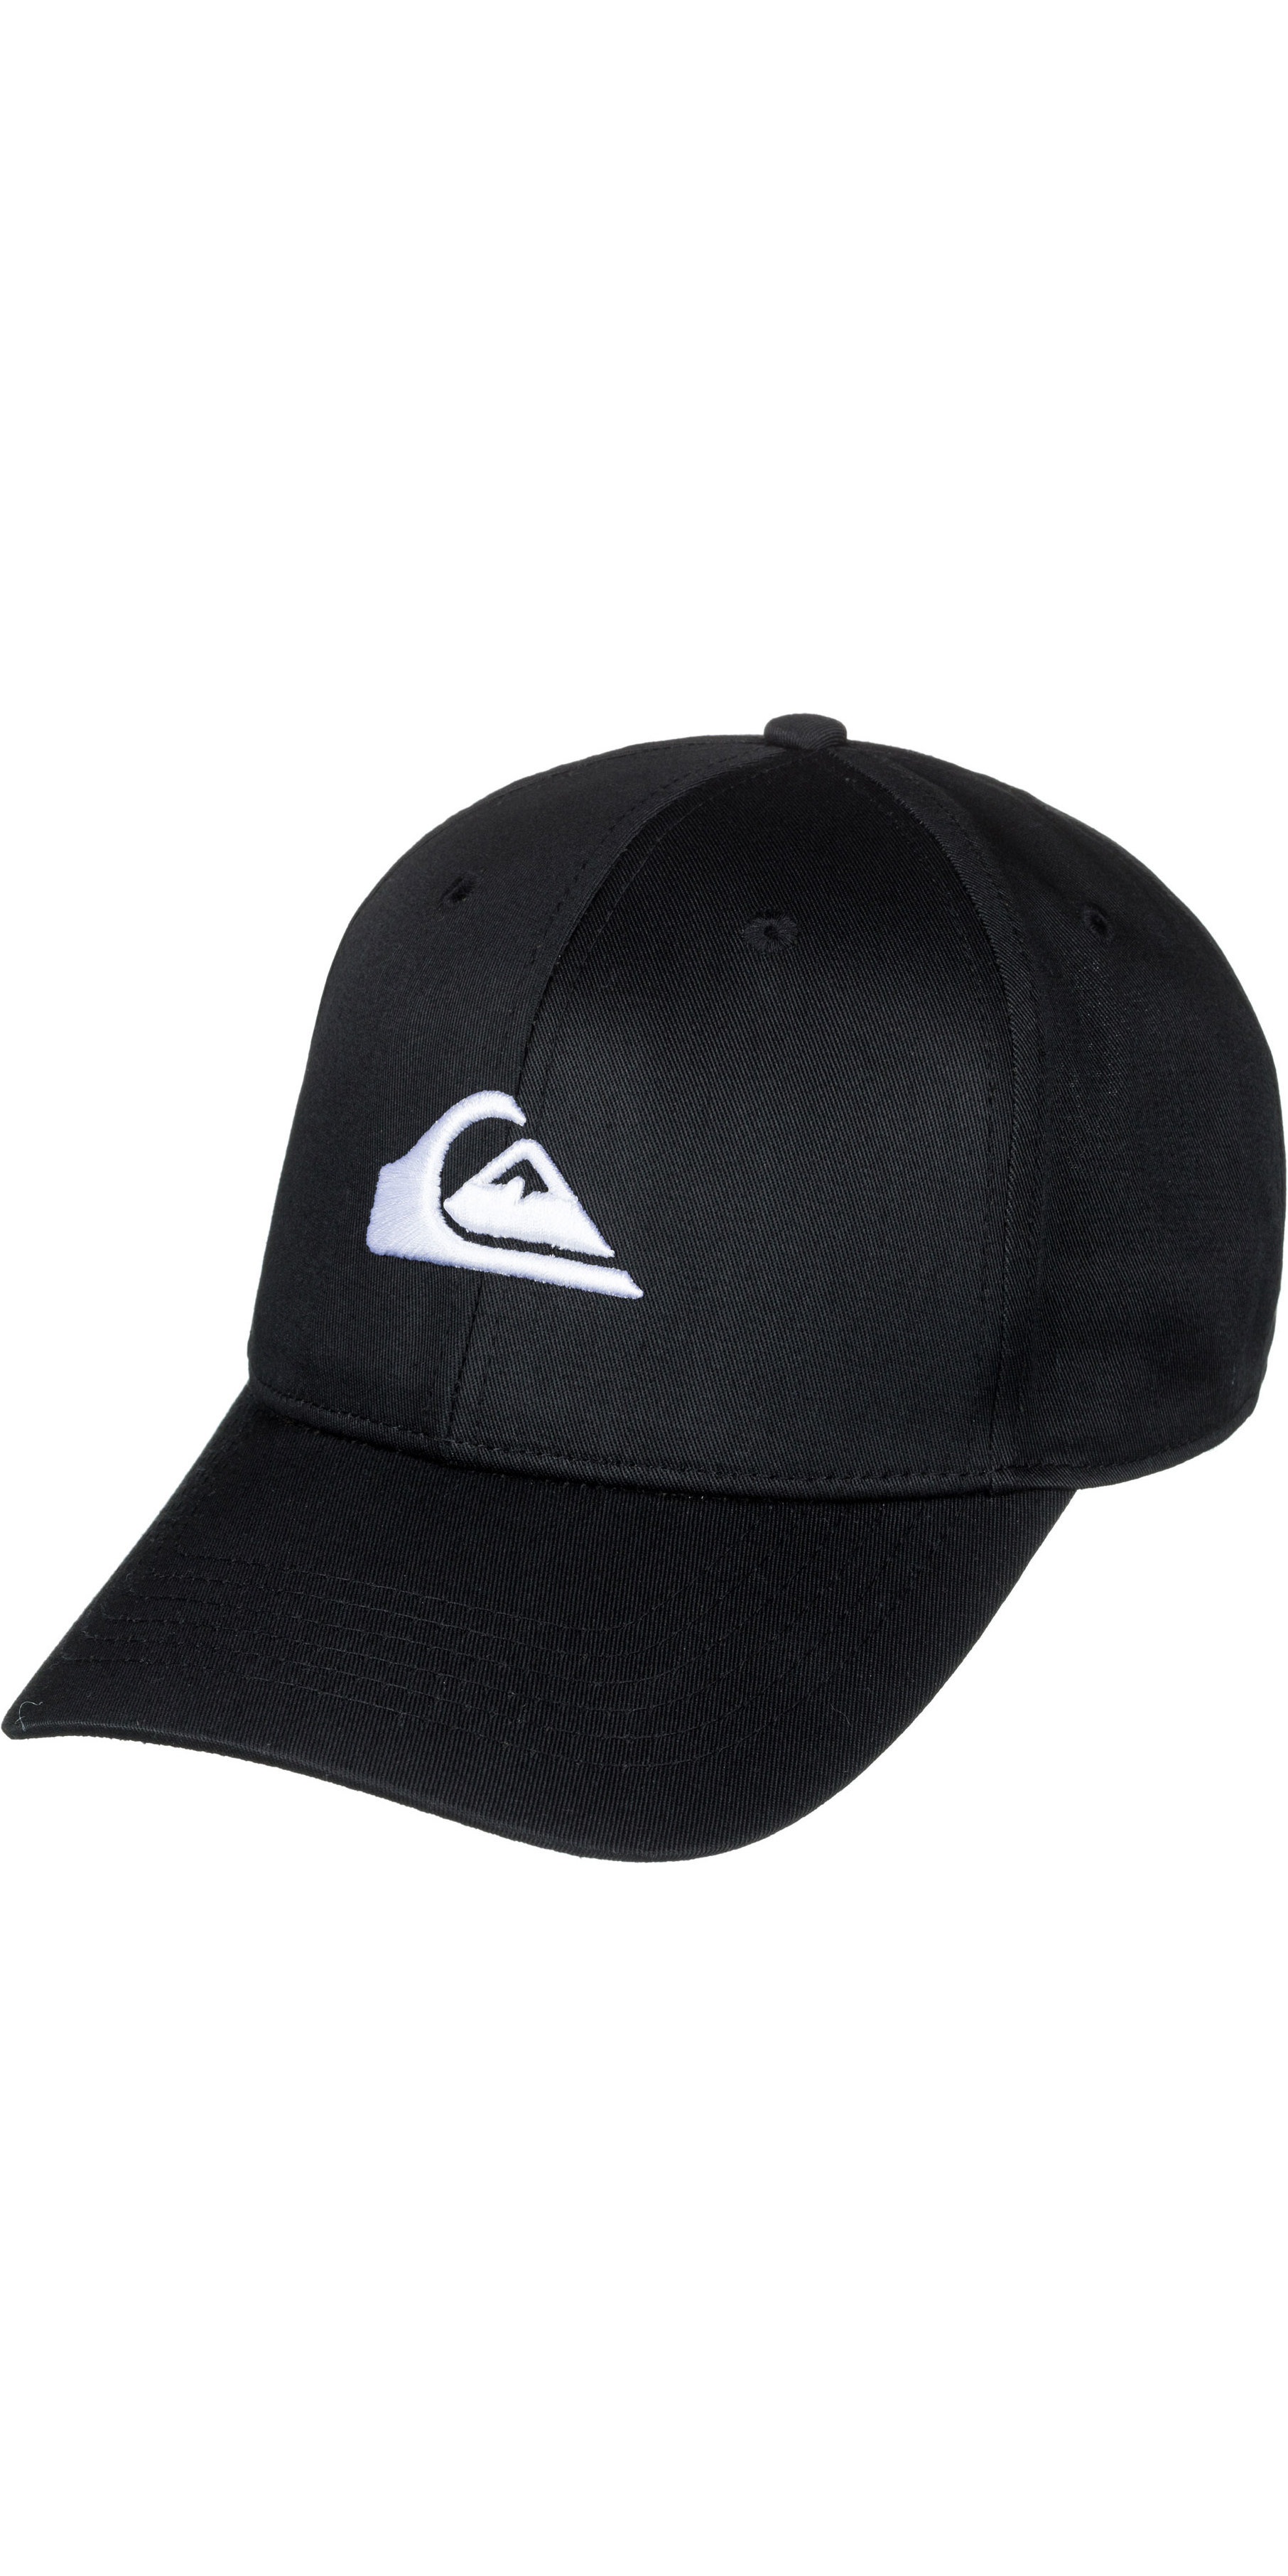 2019 Quiksilver Decades Snapback Cap Black AQYHA04002 - Sailing -  Accessories | Watersports Outlet